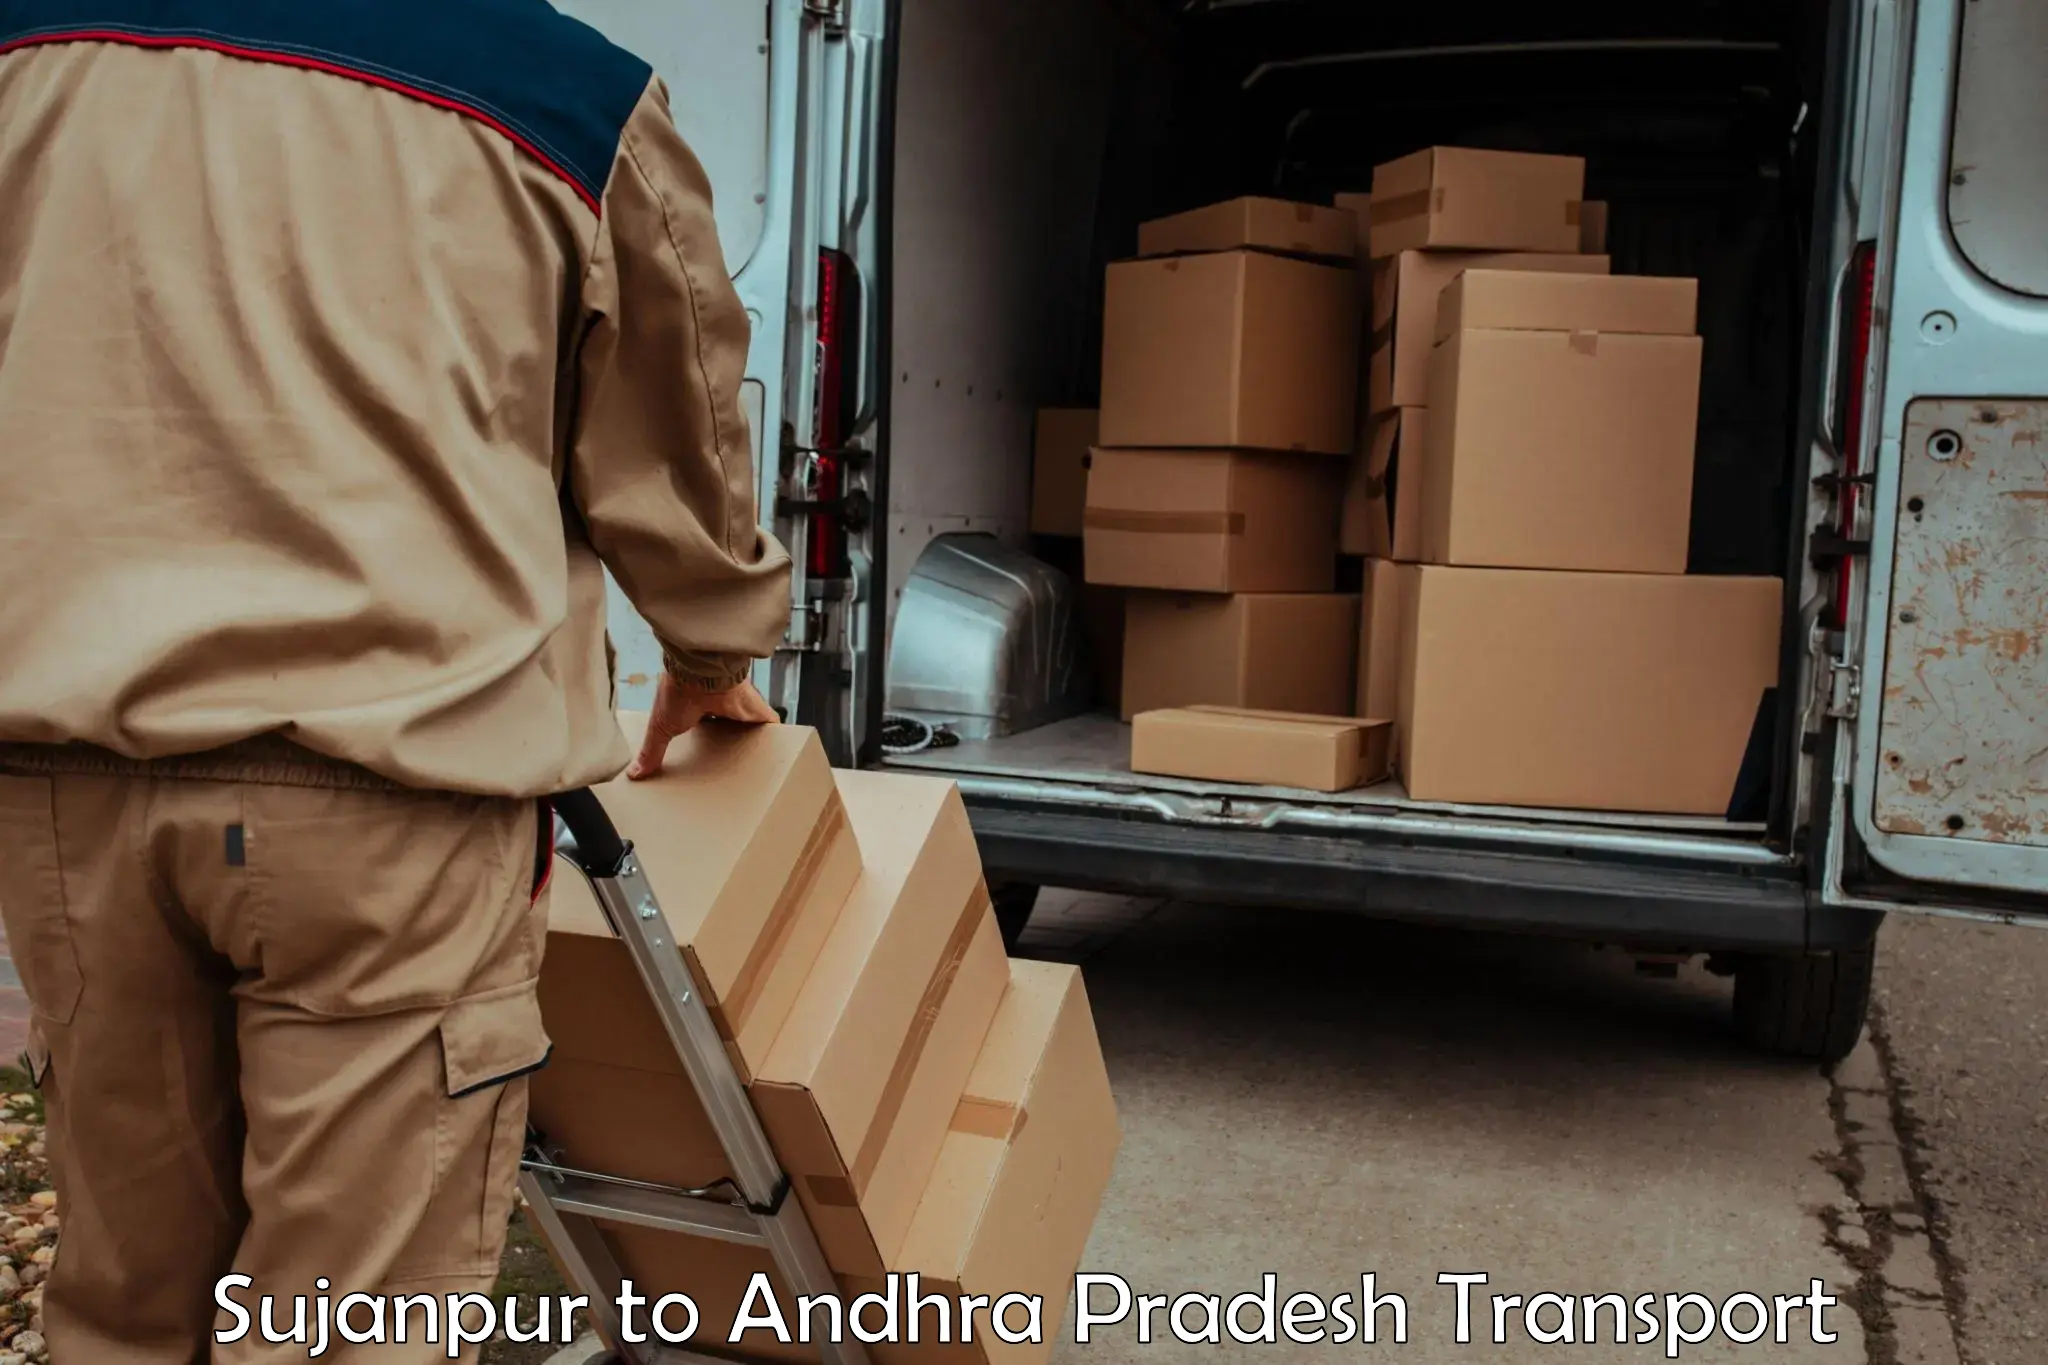 Part load transport service in India Sujanpur to Kambadur